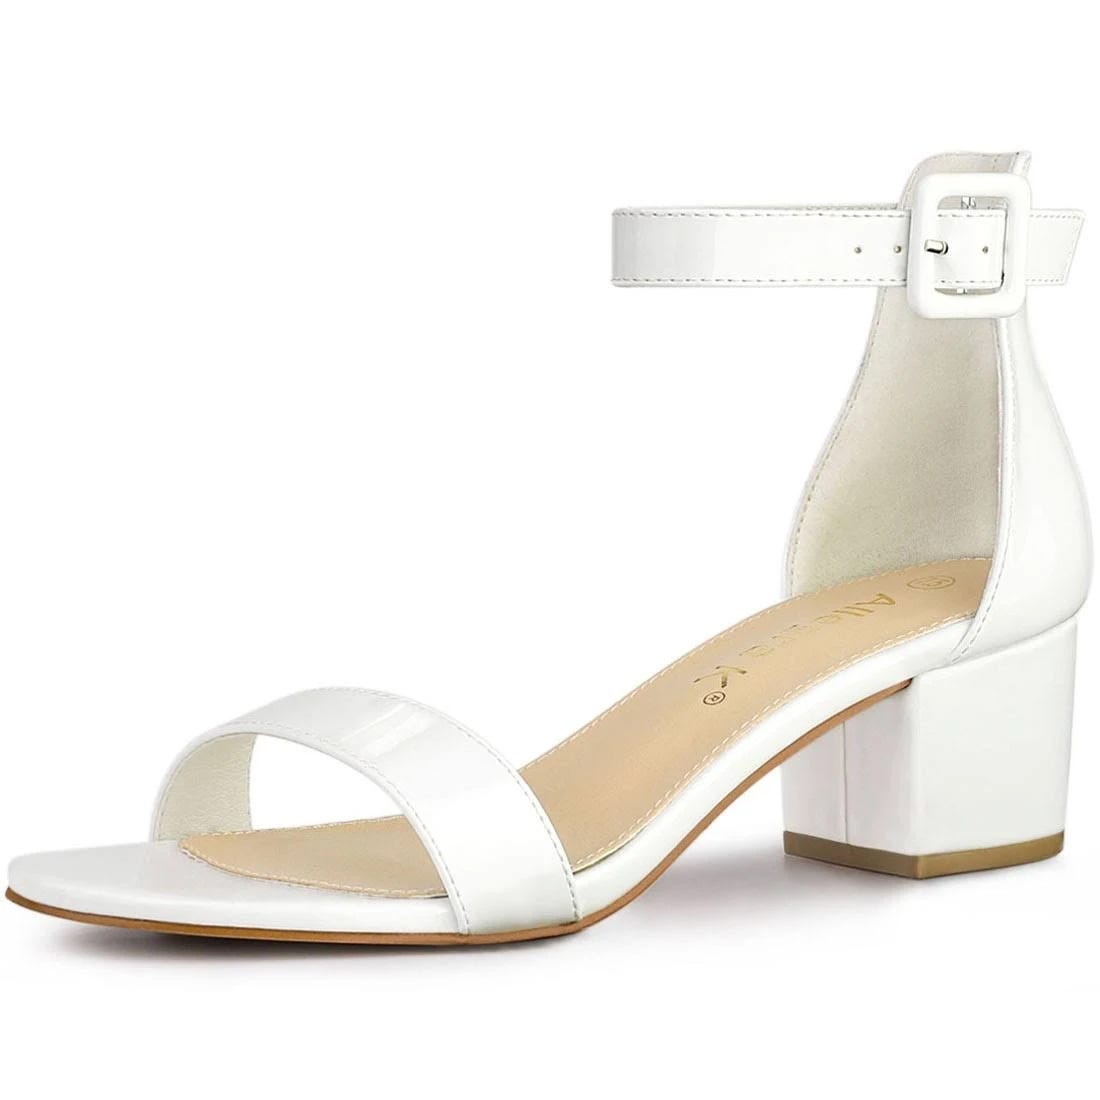 Stylish White Low-Heel Sandals with Ankle Strap | Image